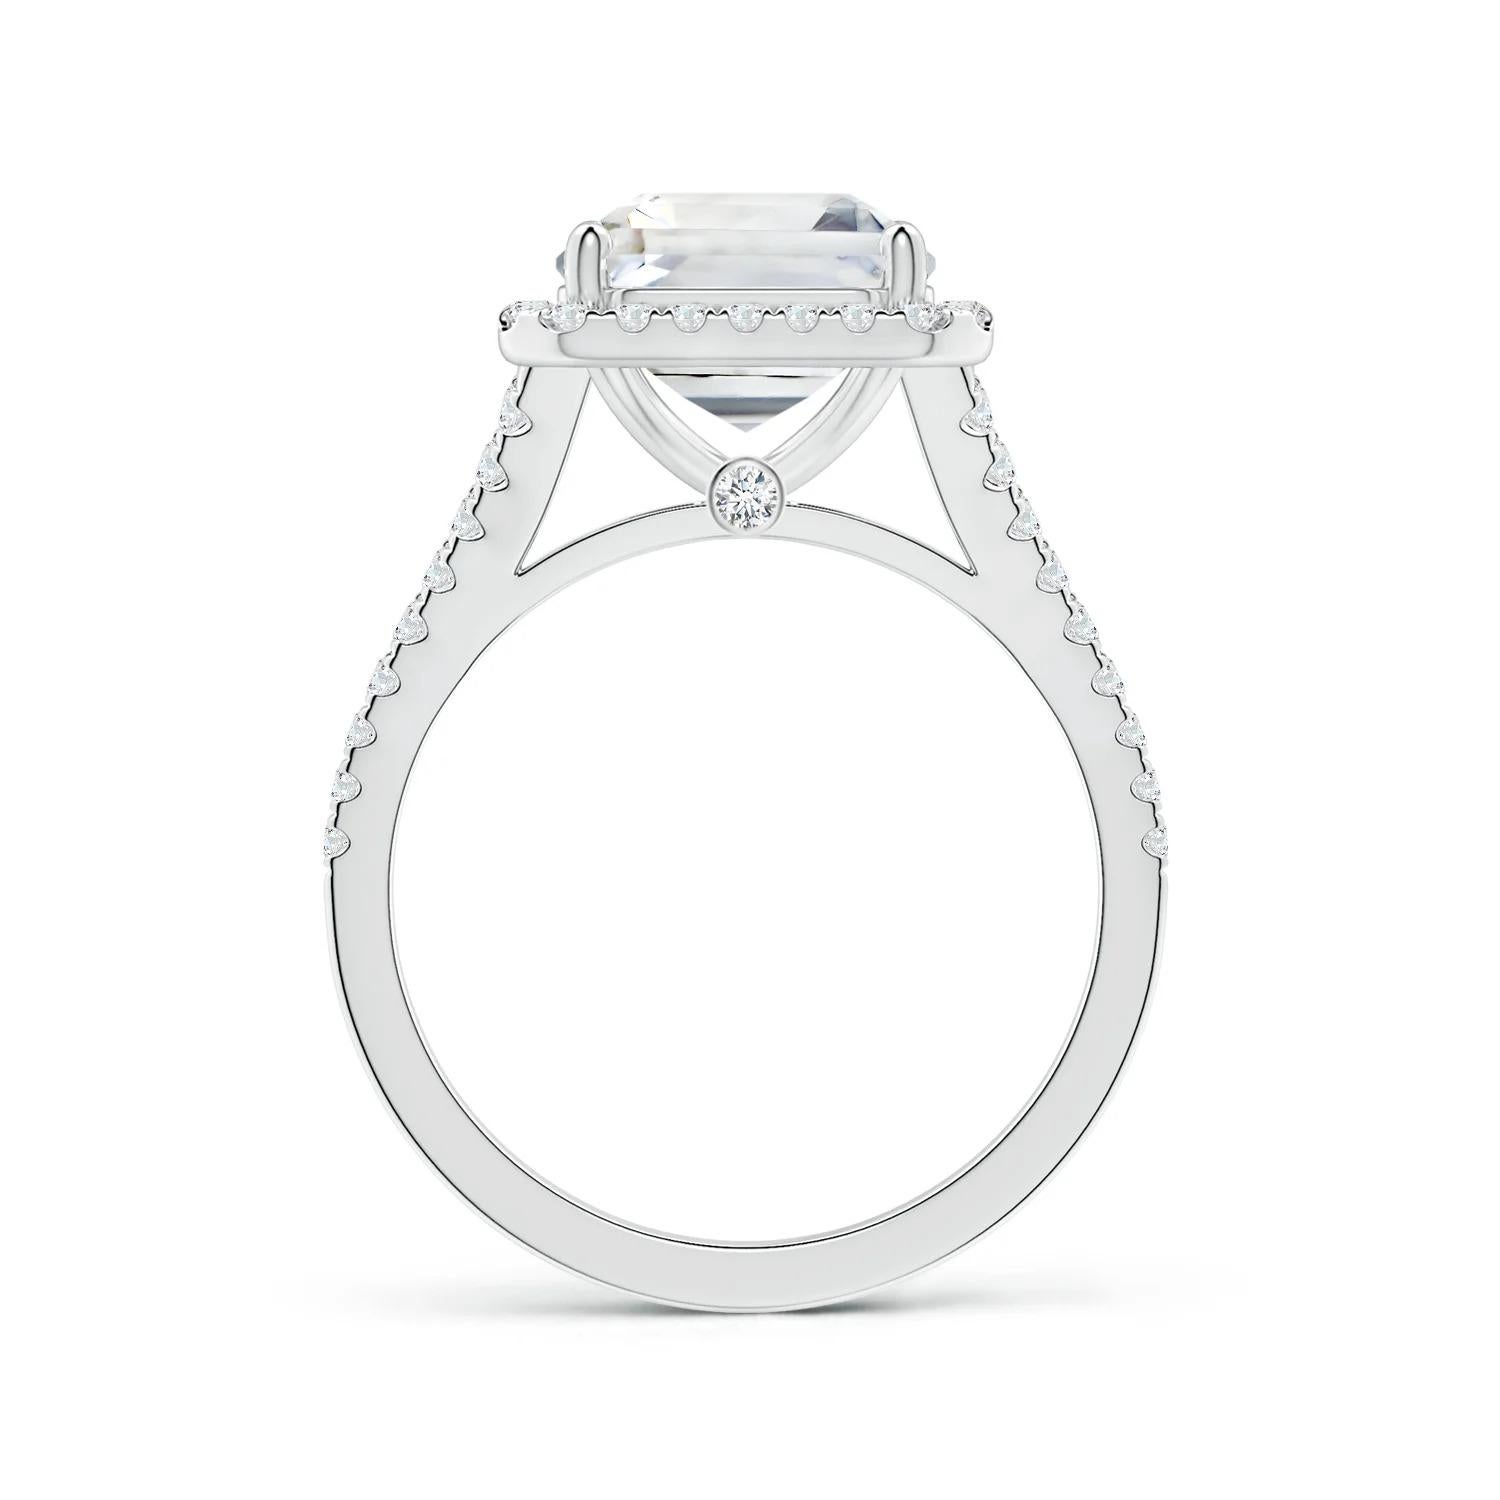 For Sale:  Angara Gia Certified Natural Emerald-Cut White Sapphire Halo Ring in White Gold 2